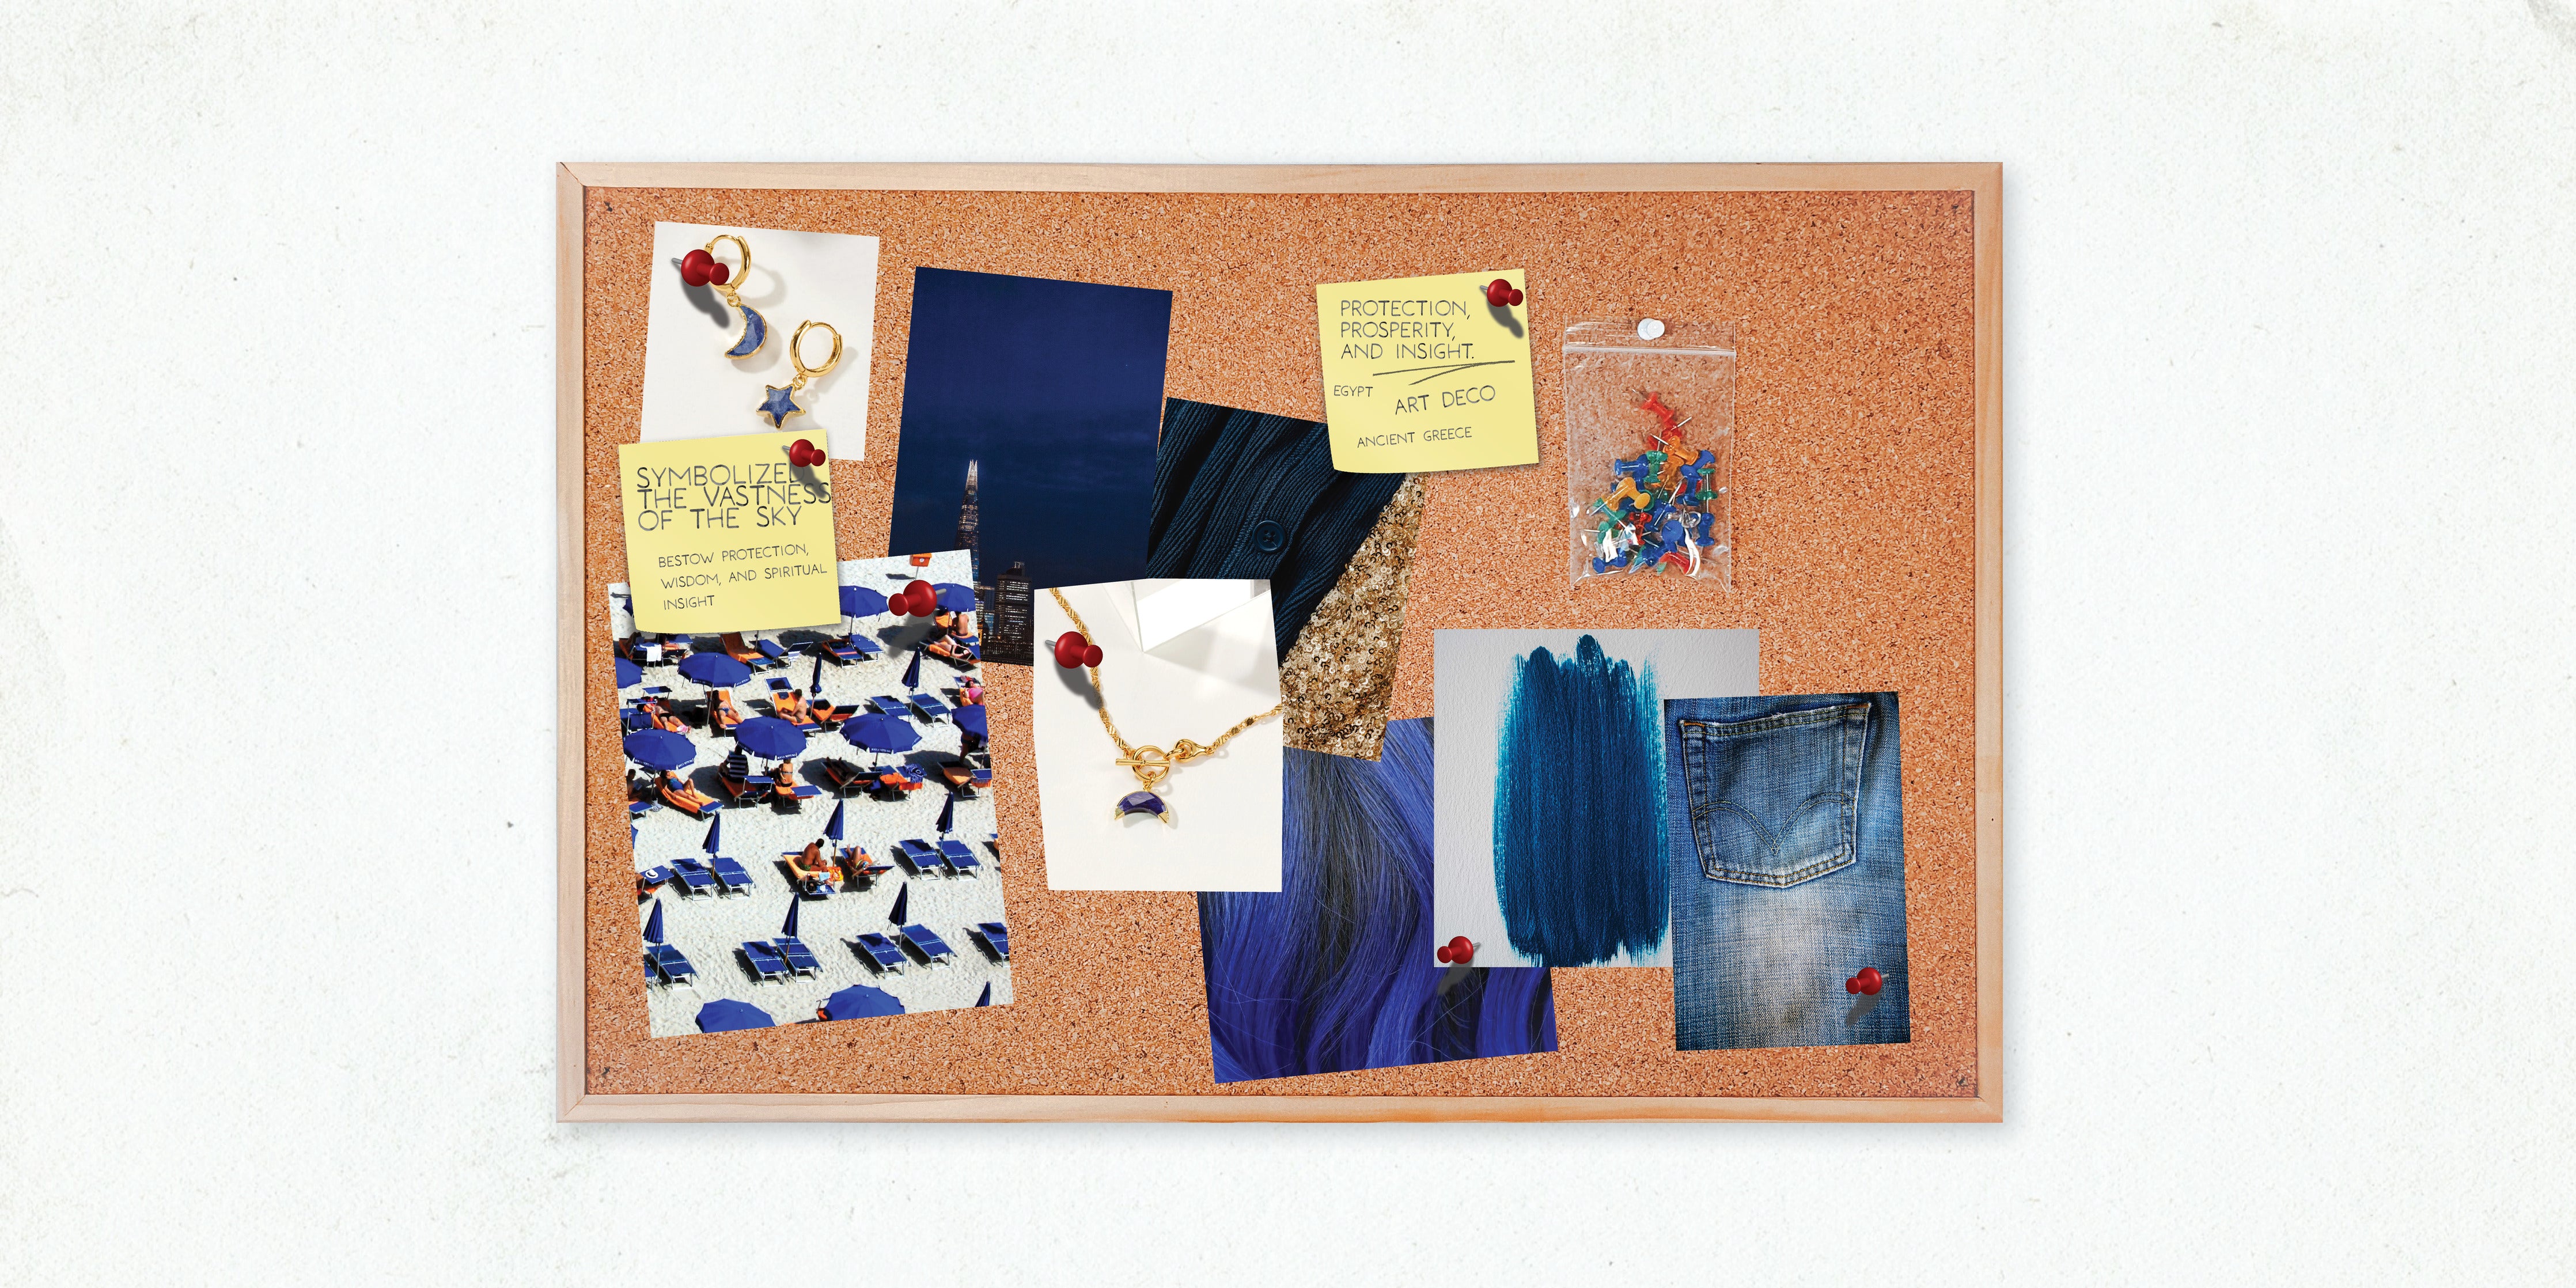 Image of a cork board with sticky notes pinned to it, pictures of denim, and pictures of sapphire moon-shaped jewelry